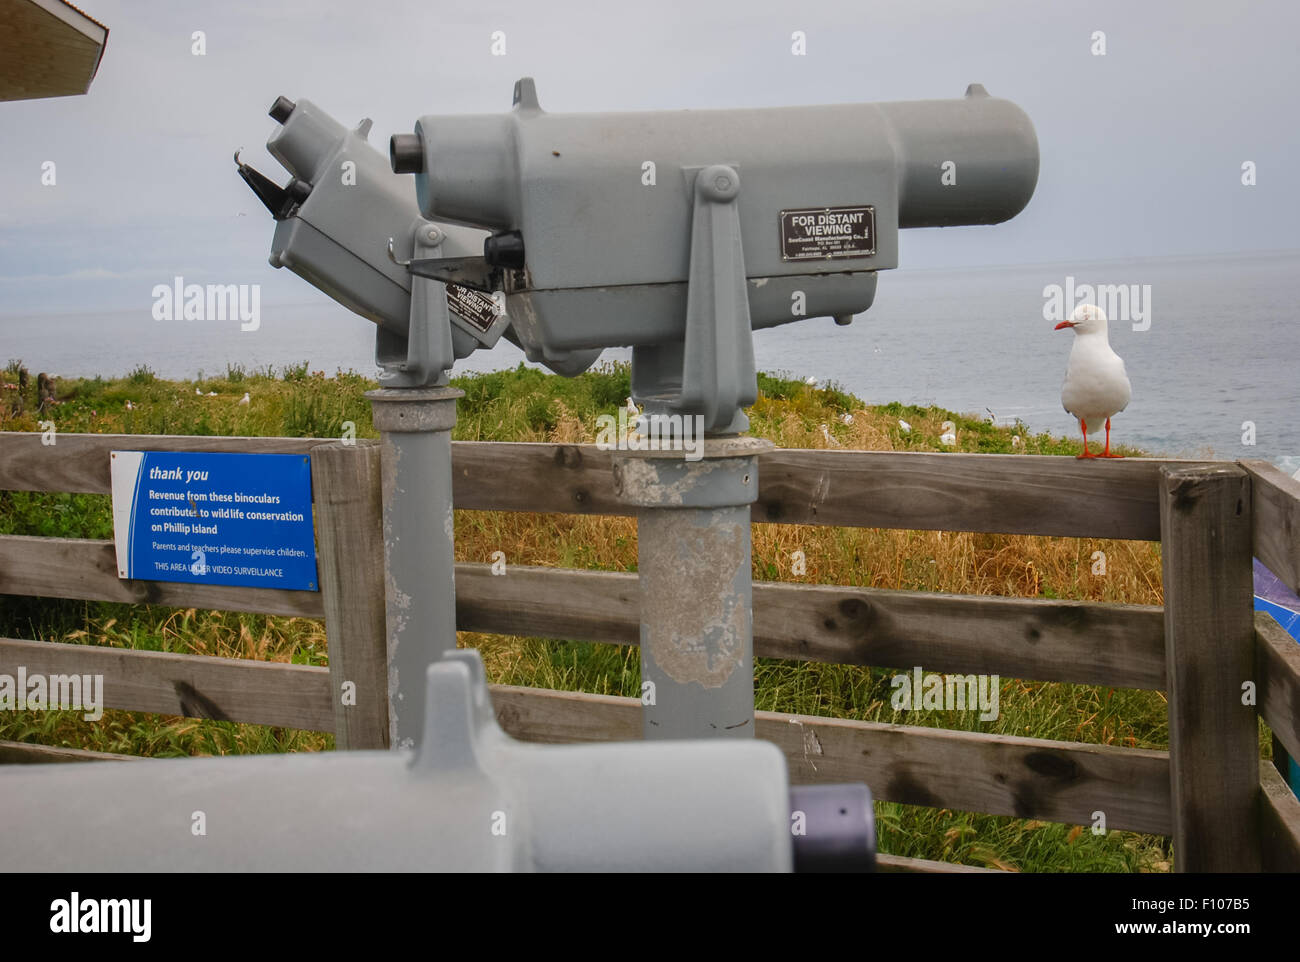 A seagull in front of large binocular at The Nobbies, Phillip Island, Victoria, Australia. Stock Photo